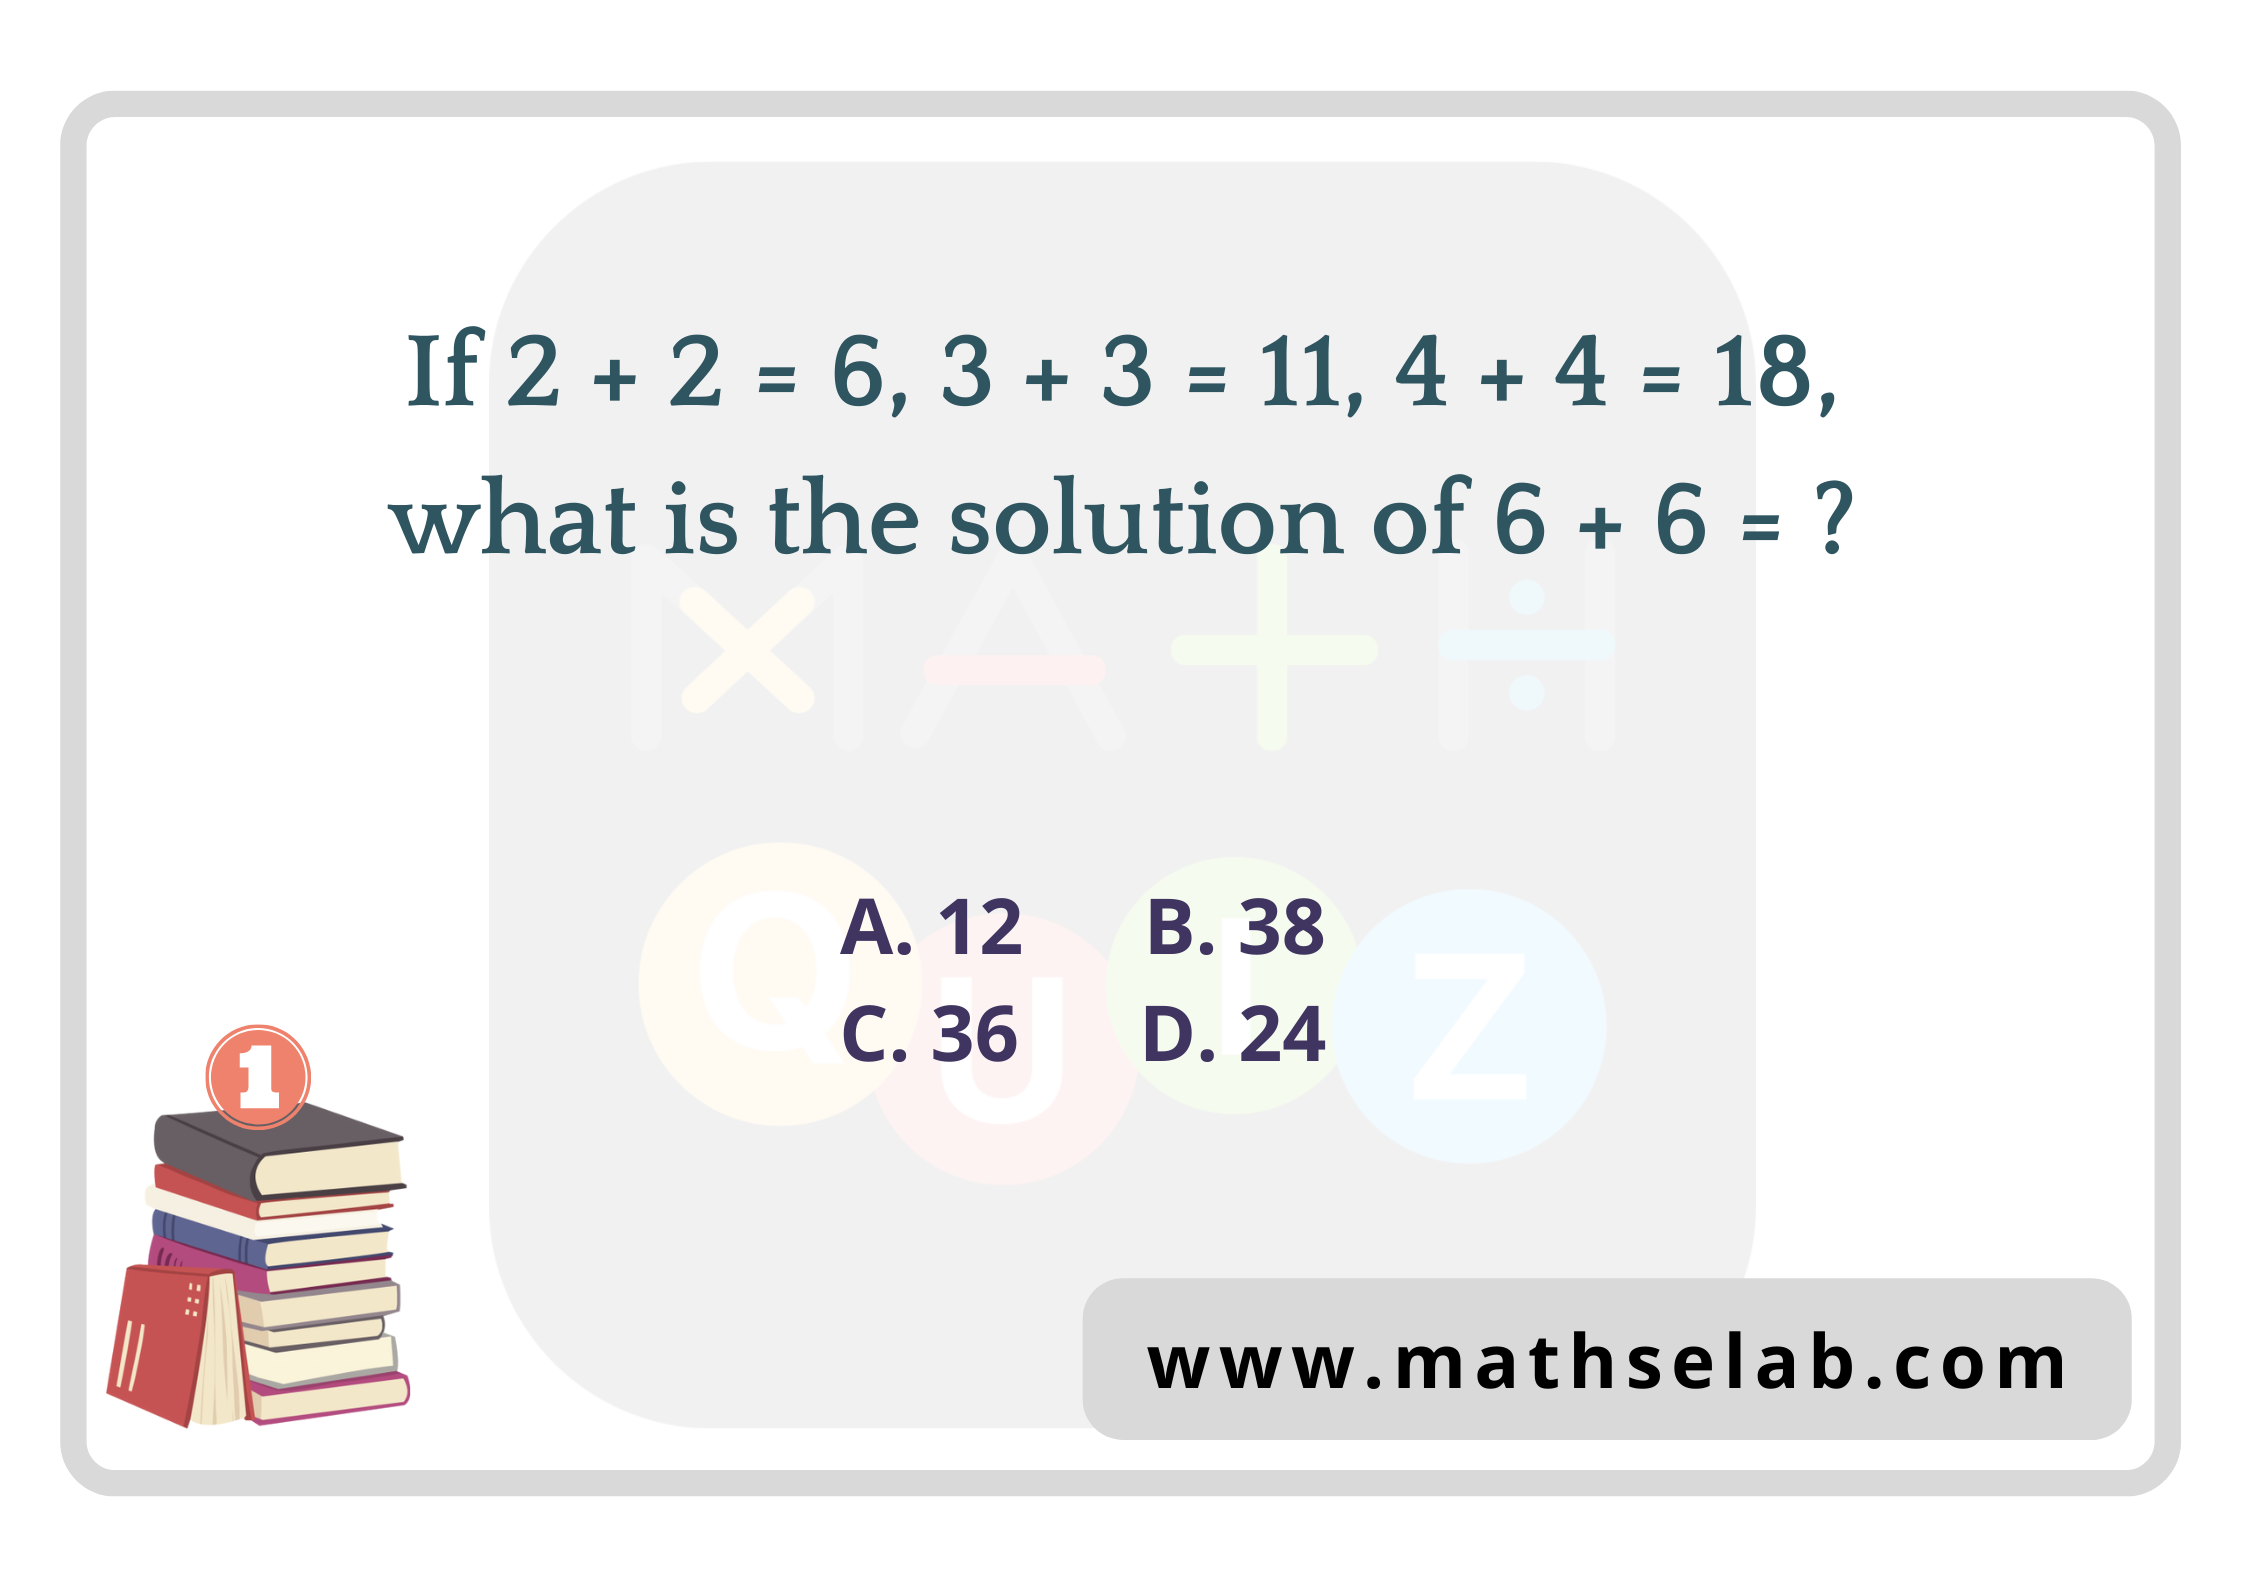 If 2 + 2 = 6, 3 + 3 = 11, 4 + 4 = 18, what is the solution of 6 + 6 = - mathselab.com